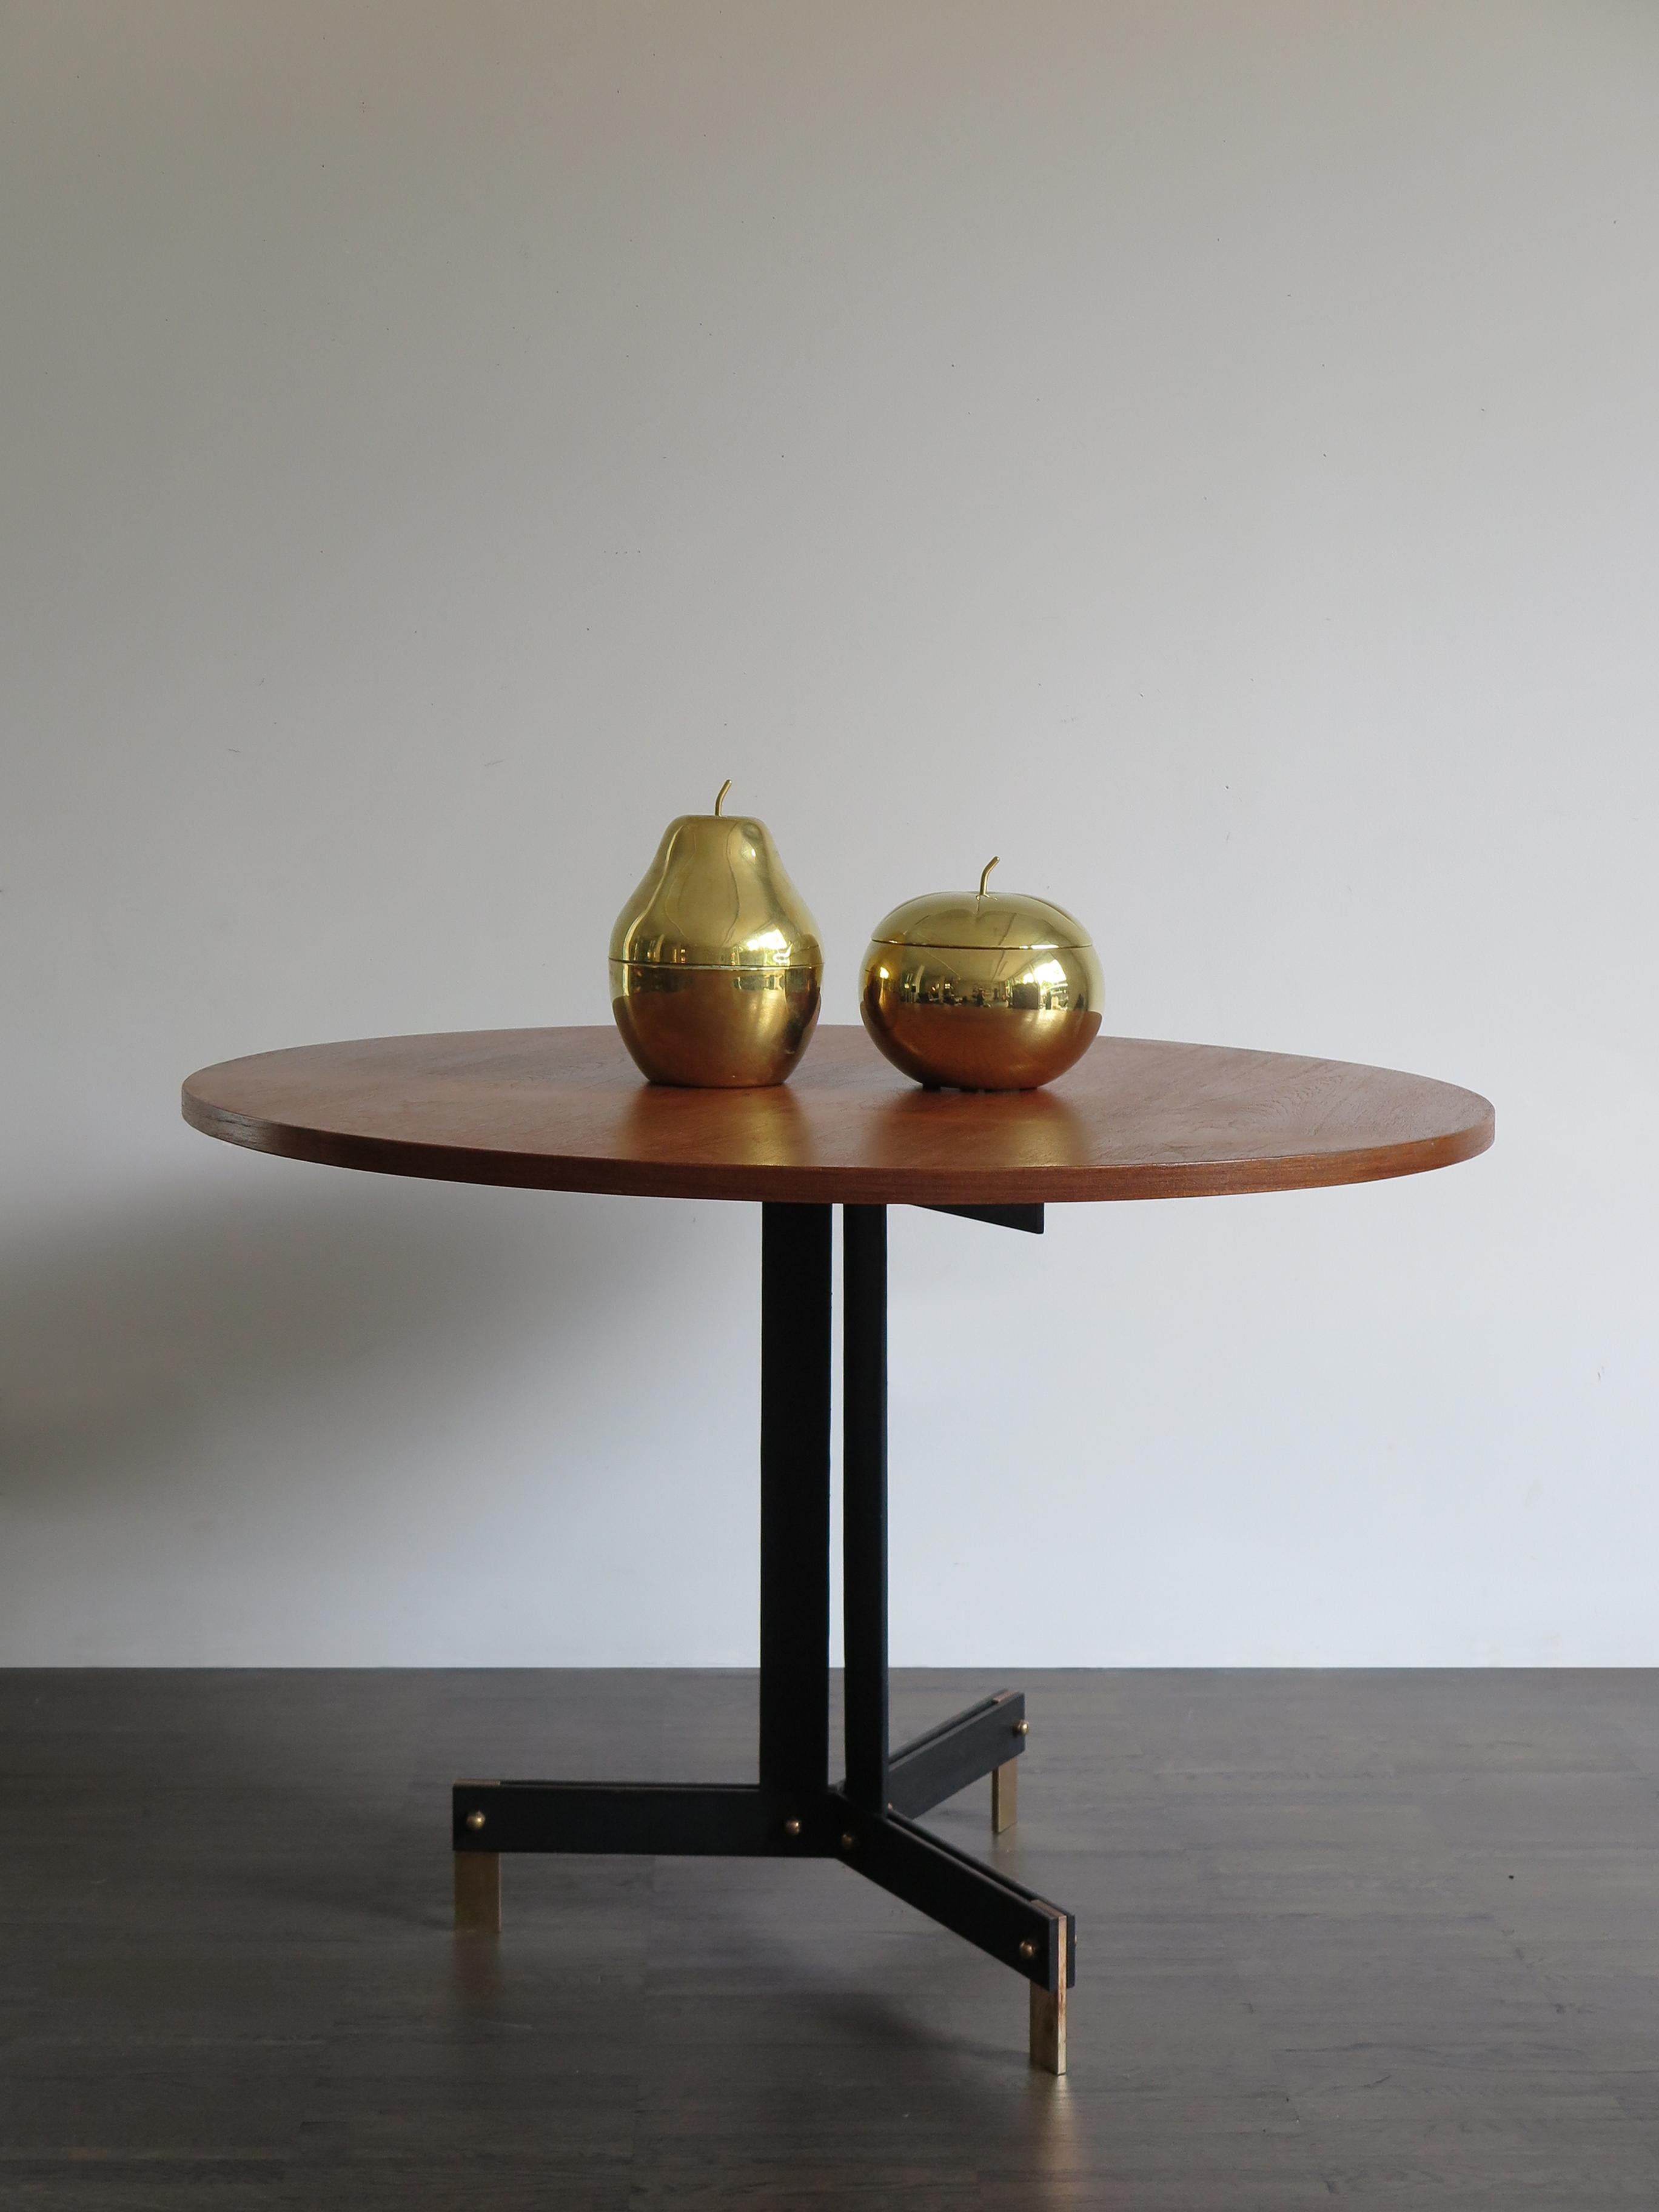 Italian Mid-Century Modern design round dining table attributed to the designer Ignazio Gardella with teak top and amazing painted metal foot with bolts and brass terminals, circa 1950.

Please note that the item is original of the period and this